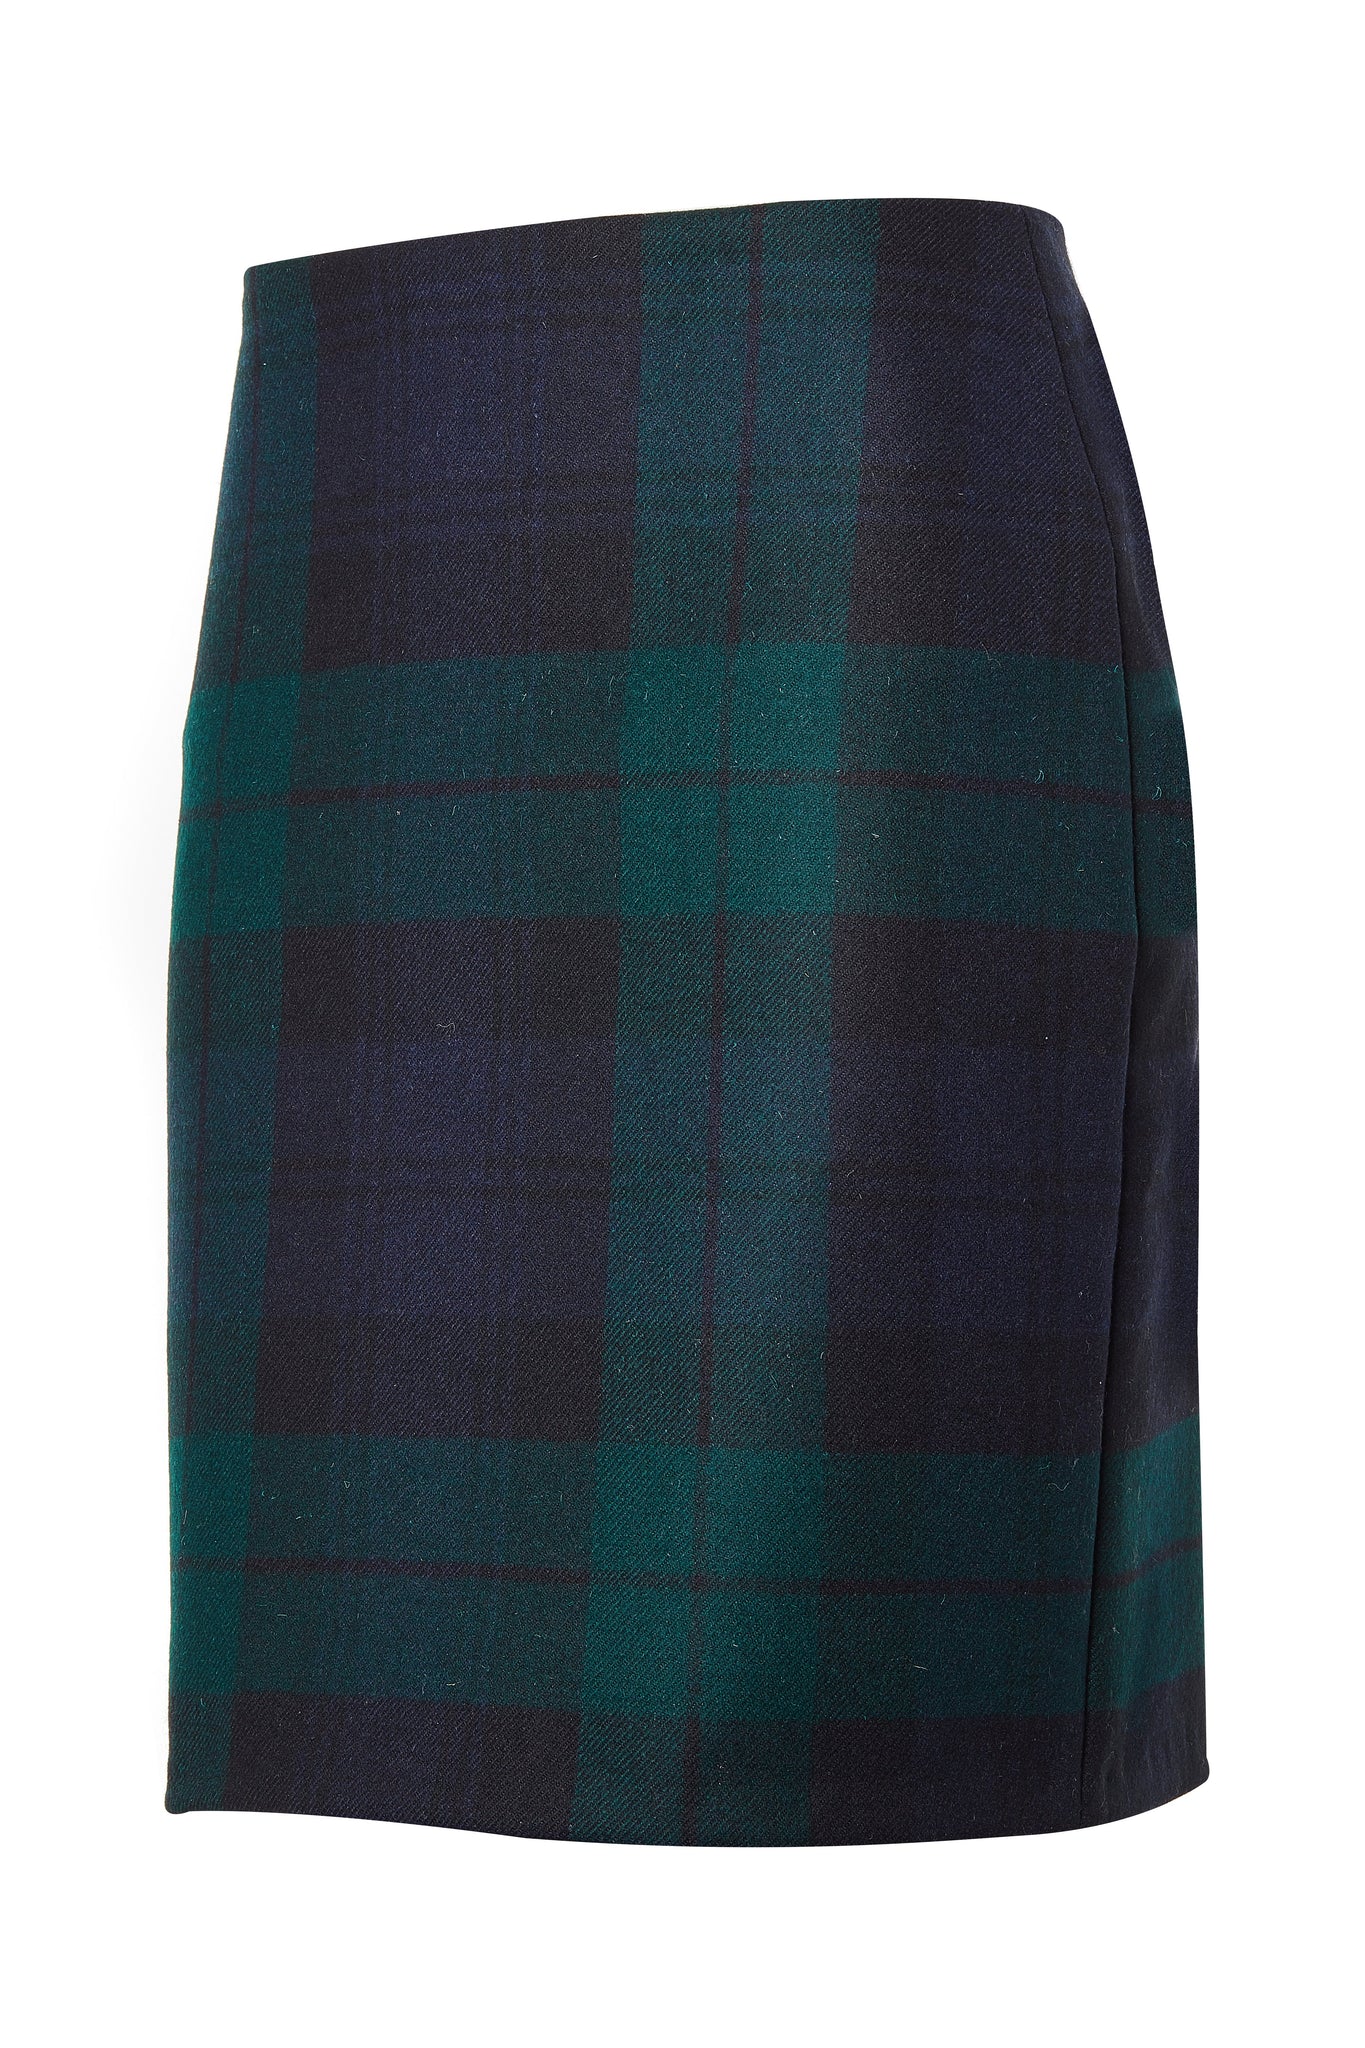 womens wool pencil mini skirt in navy and green blackwatch tweed with slit on back and zip fastening on centre back